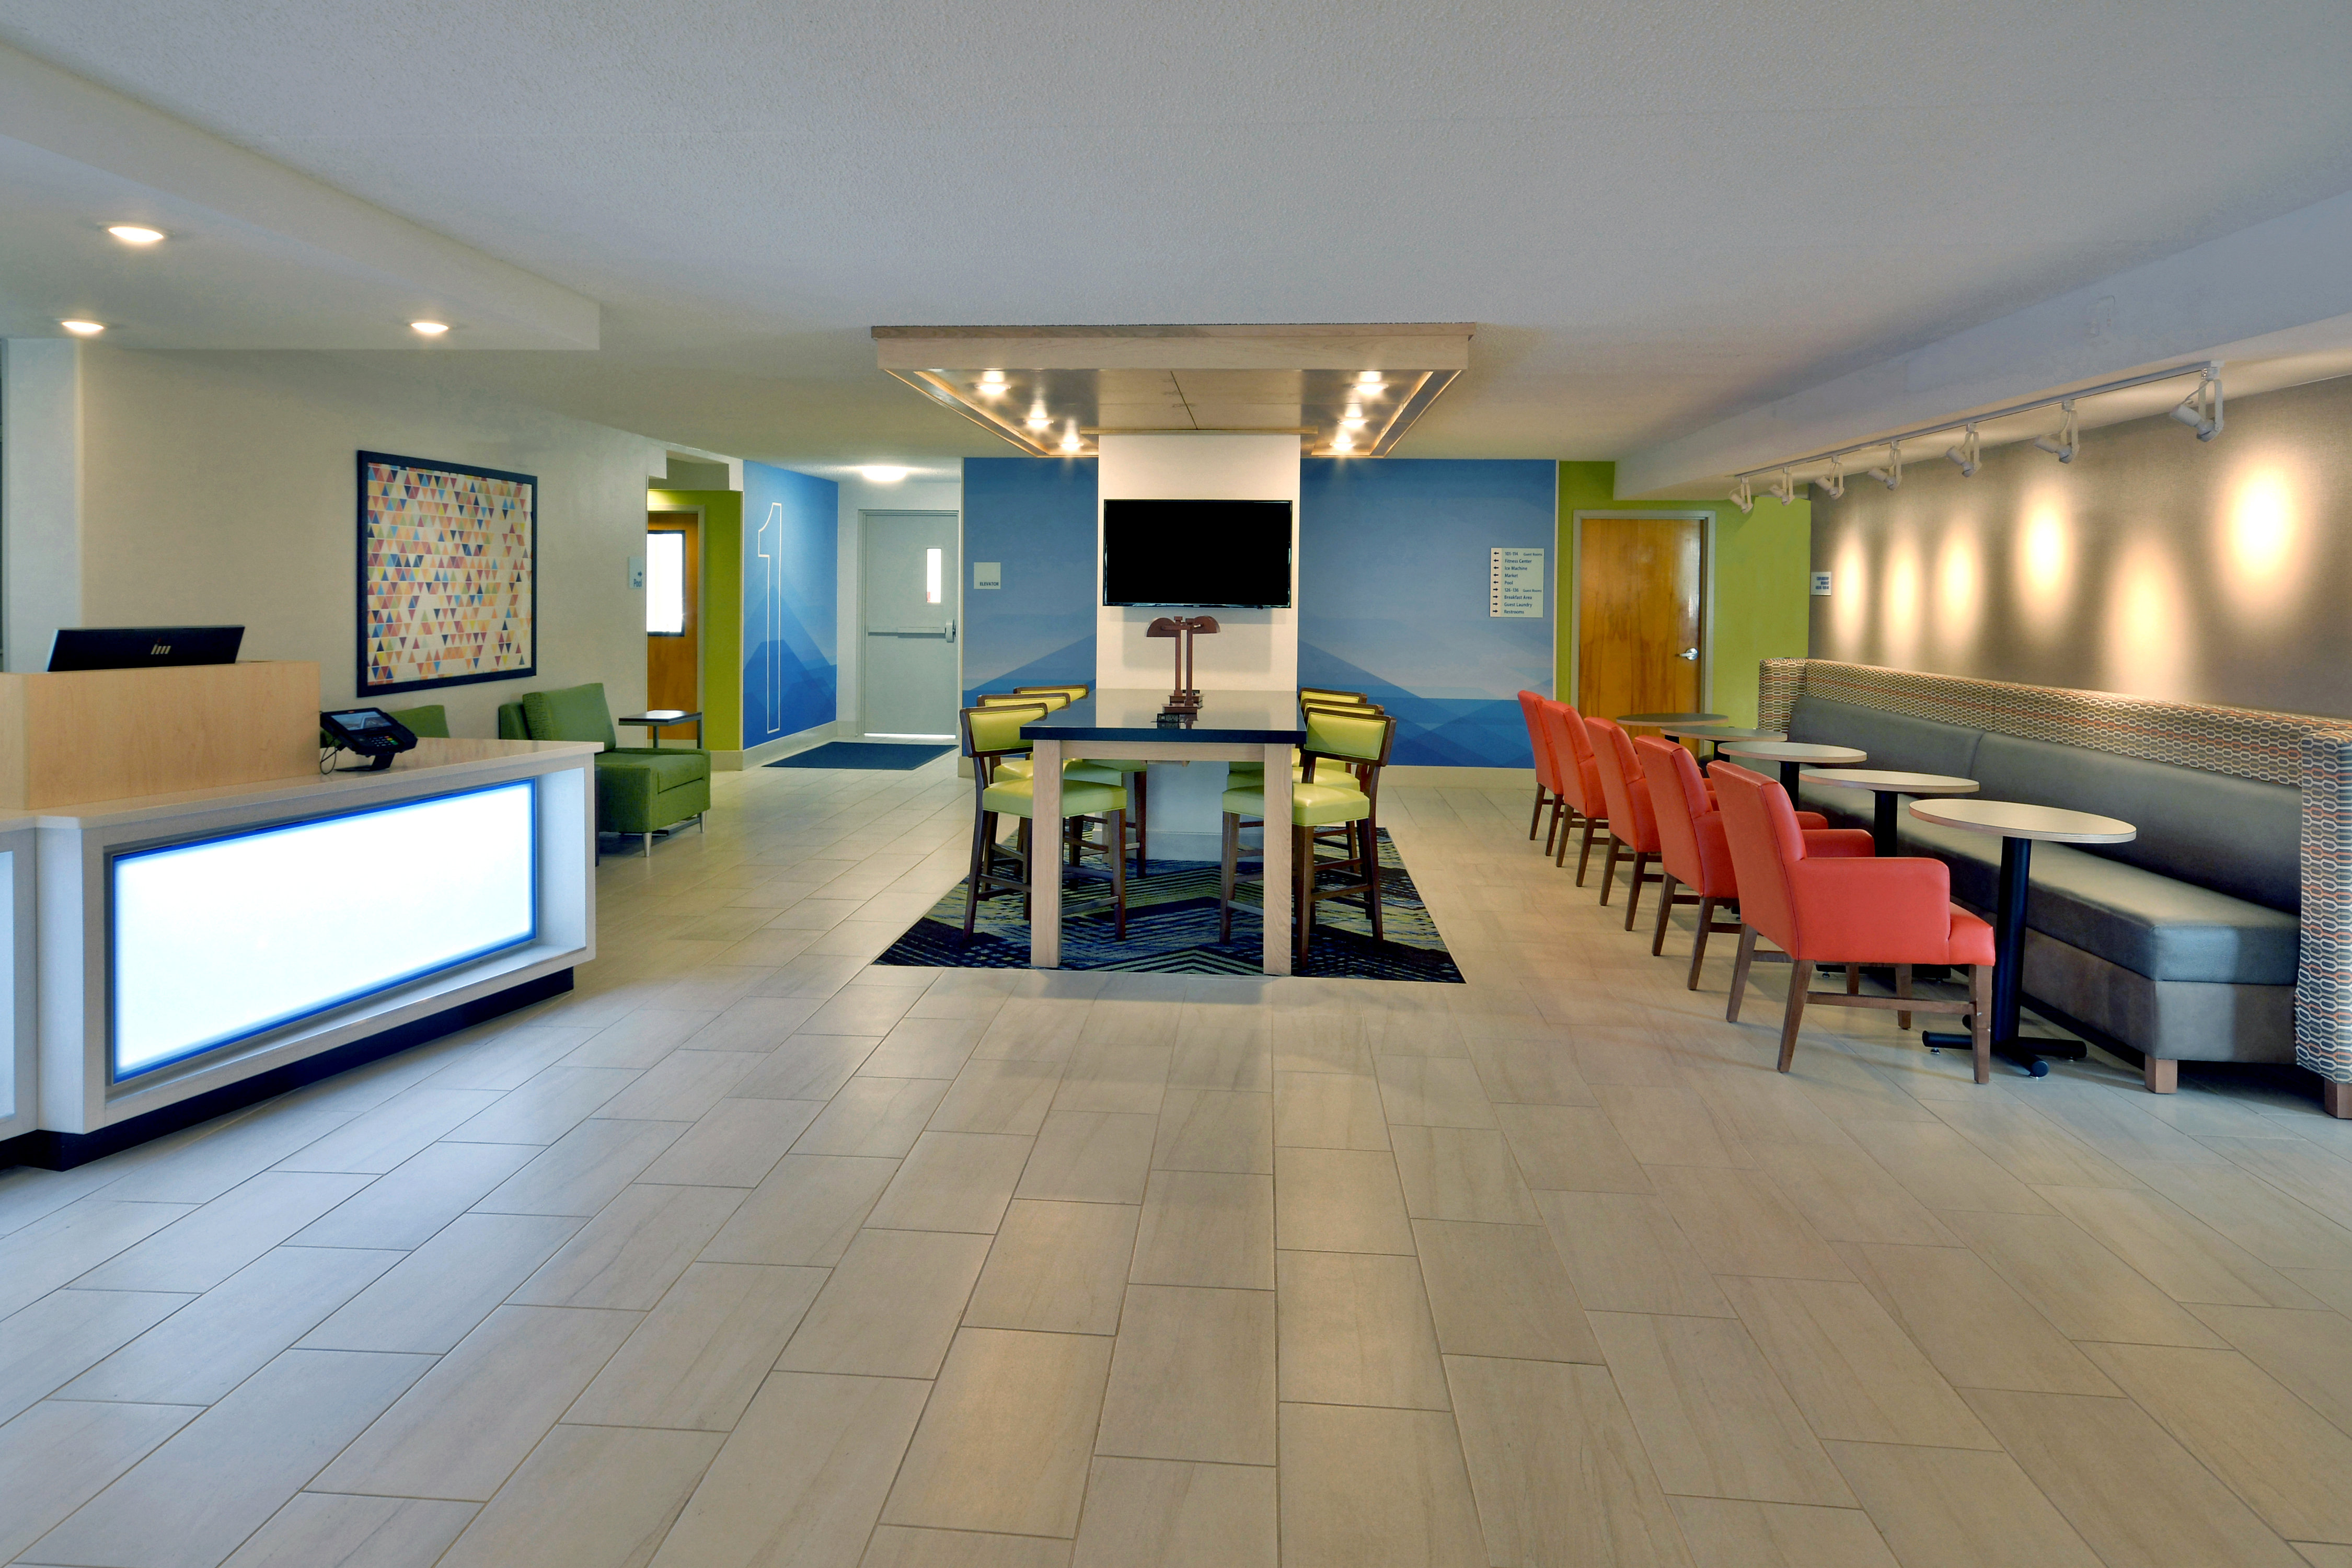 There's plenty of room to gather with friends in our modern lobby.